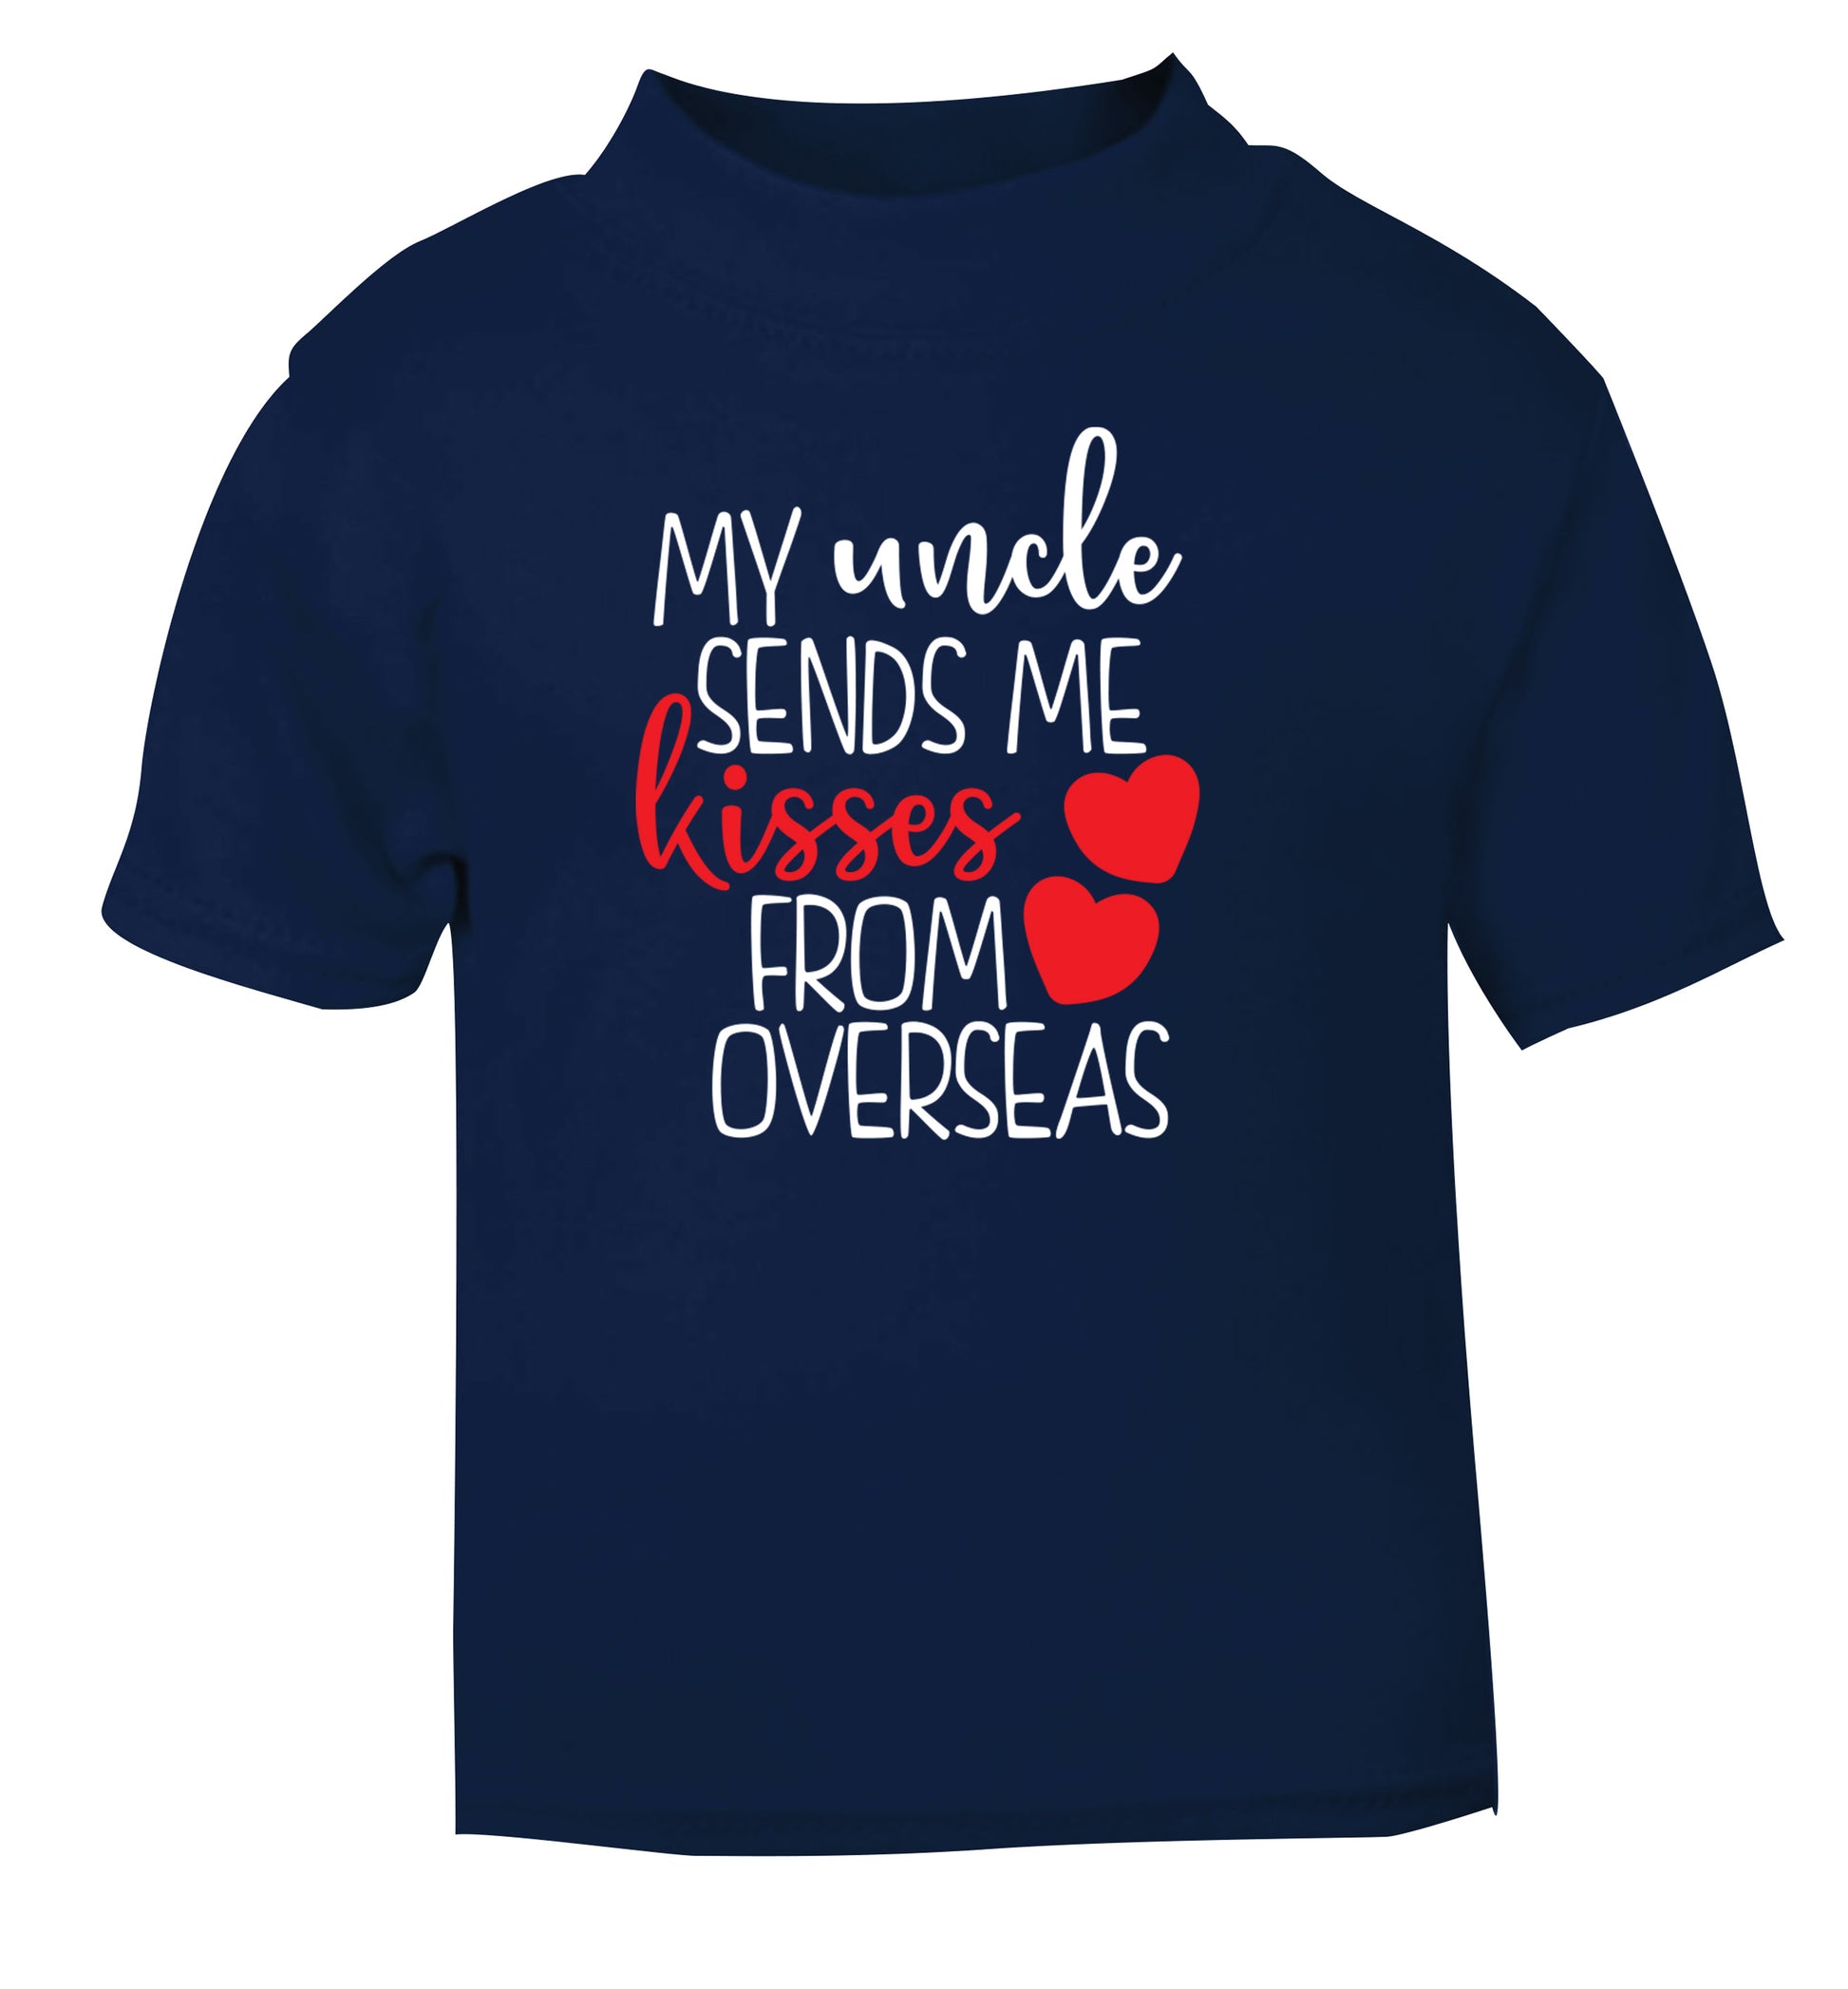 My uncle sends me kisses from overseas navy Baby Toddler Tshirt 2 Years